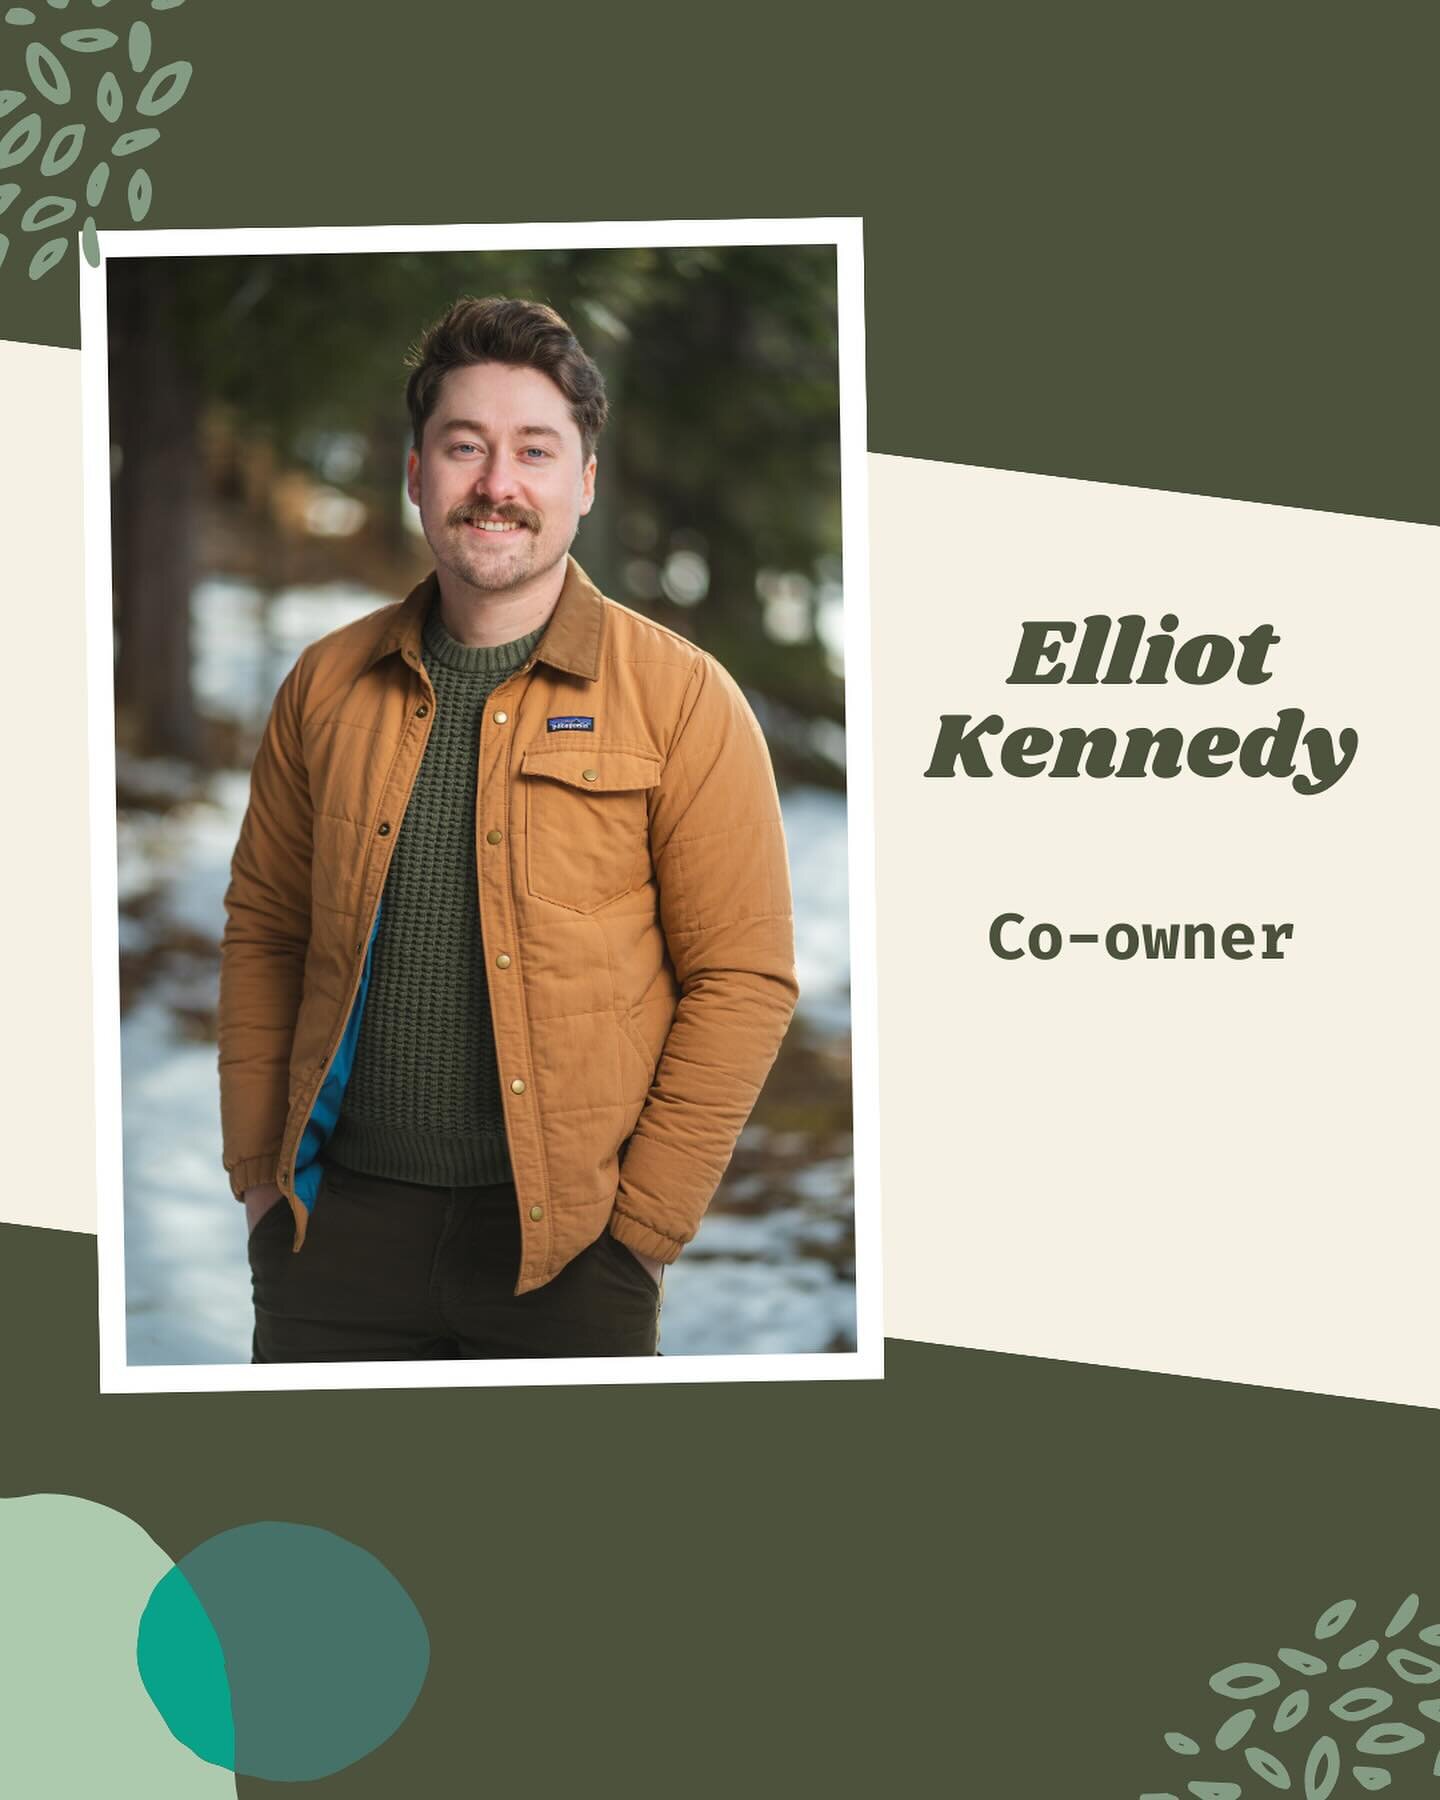 Hello, I&rsquo;m Elliot Kennedy, the other half of The Elm Creative.

I graduated from Northern Michigan University in 2021 with a degree in Film and a minor in Marketing. My passion for photo and video comes from a place of storytelling and helping 